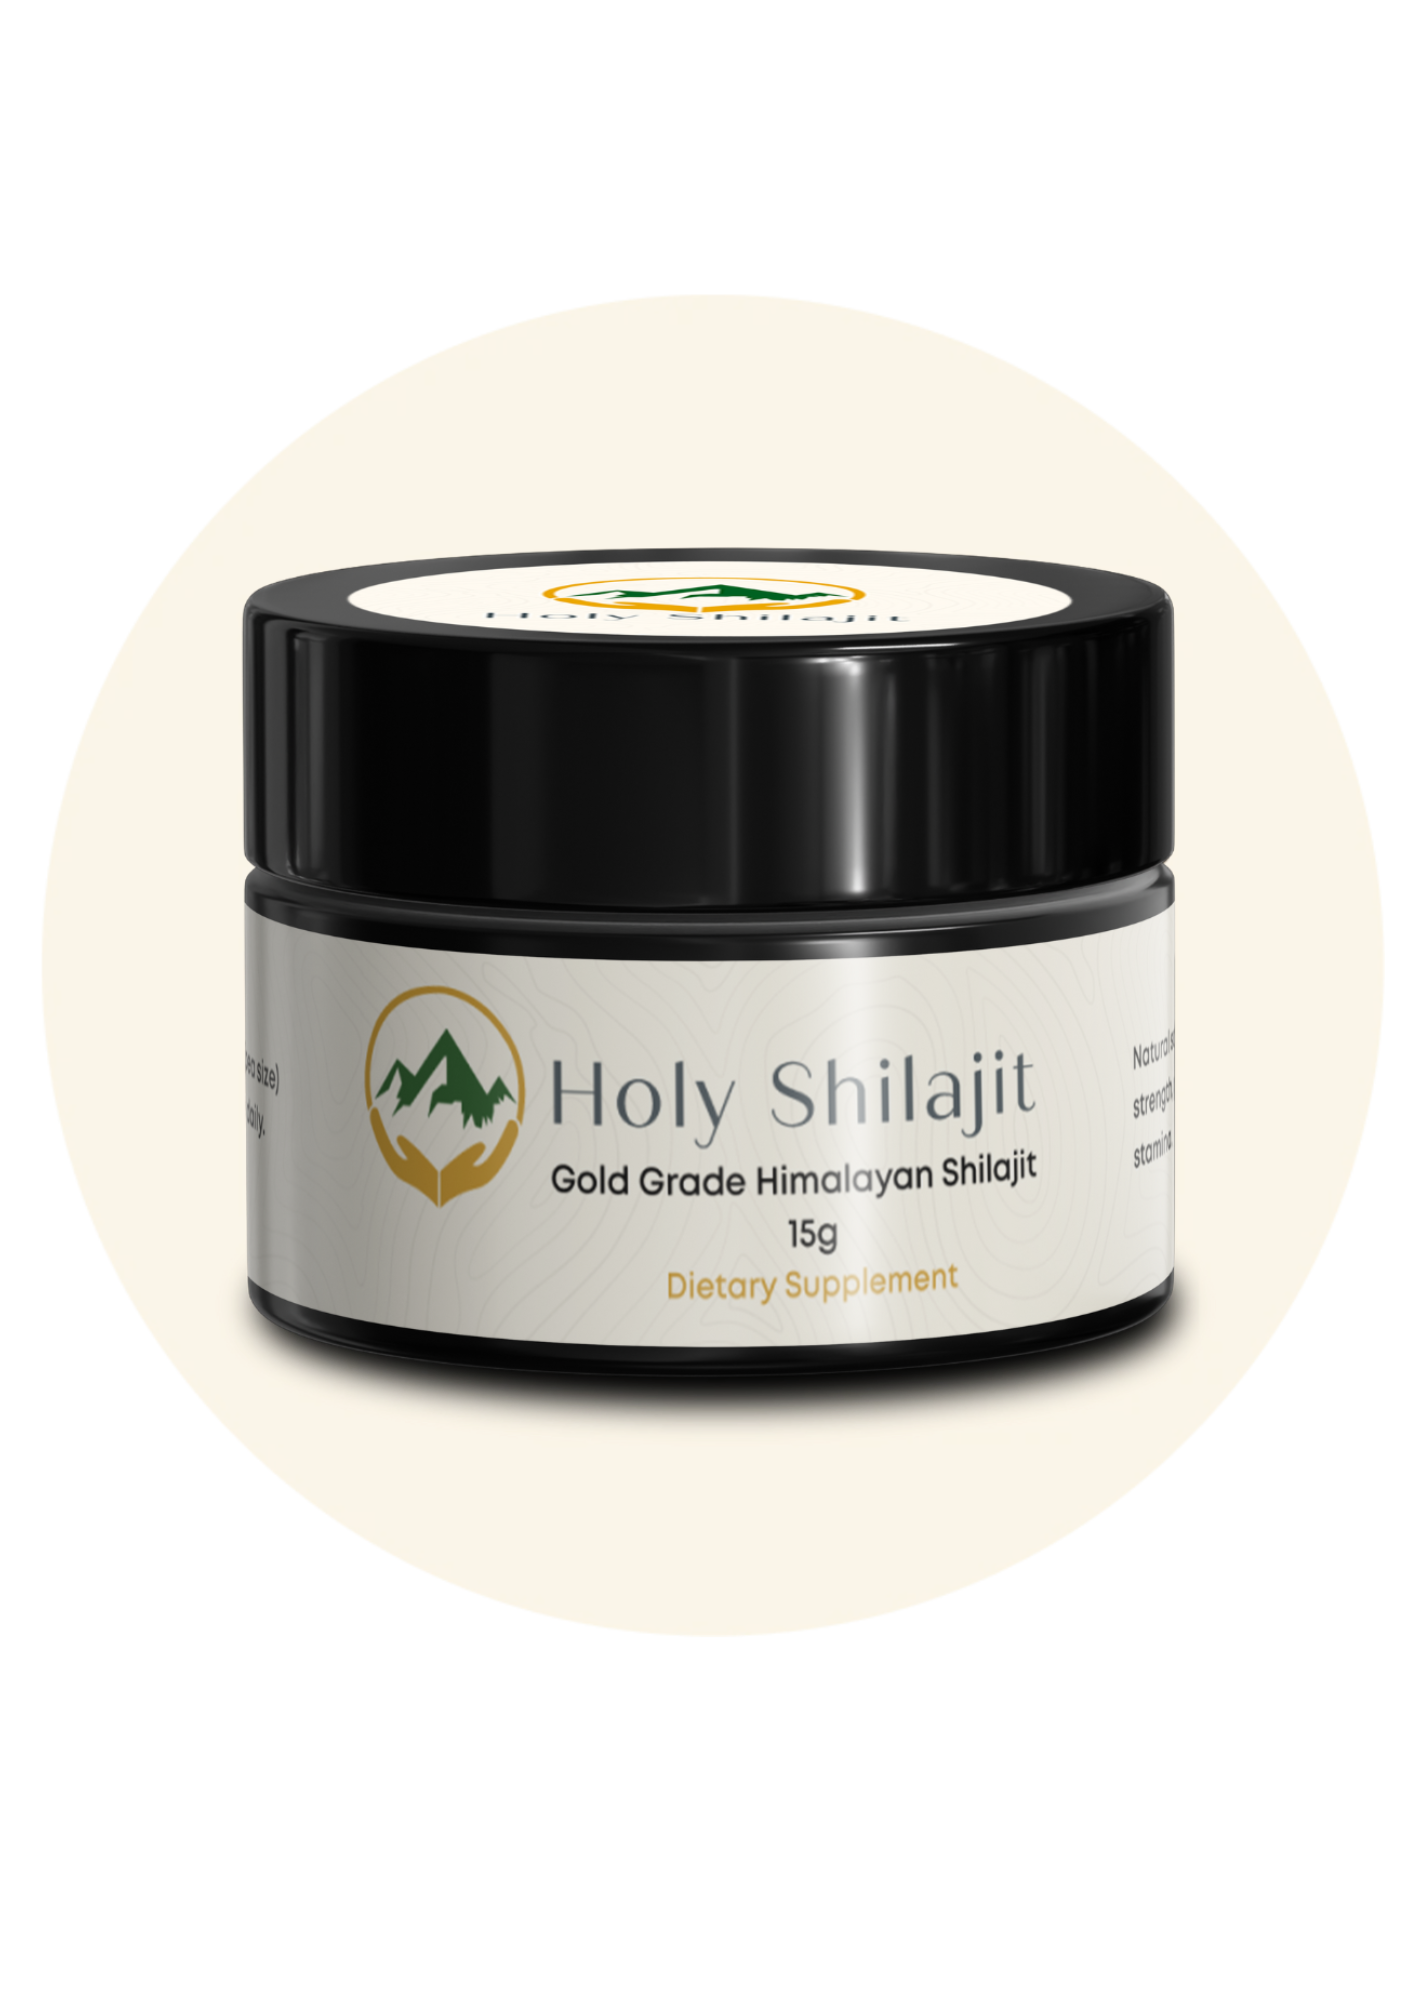 <p>Shilajit is a powerful resin from high altitude Himalayan mountains. We partner with the local Himalayan community to harvest, filter, and sun-dry Holy Shilajit. The final product is then shipped to the USA for thorough lab testing to ensure that the shilajit you're getting is the highest-quality shilajit currently offered to the public. In fact, Arbor Labs in California recently tested Holy Shilajit for antioxidant levels and the results were astonishing: one serving contains 12x more antioxidants than blueberrries and 32x more than kale. </p>